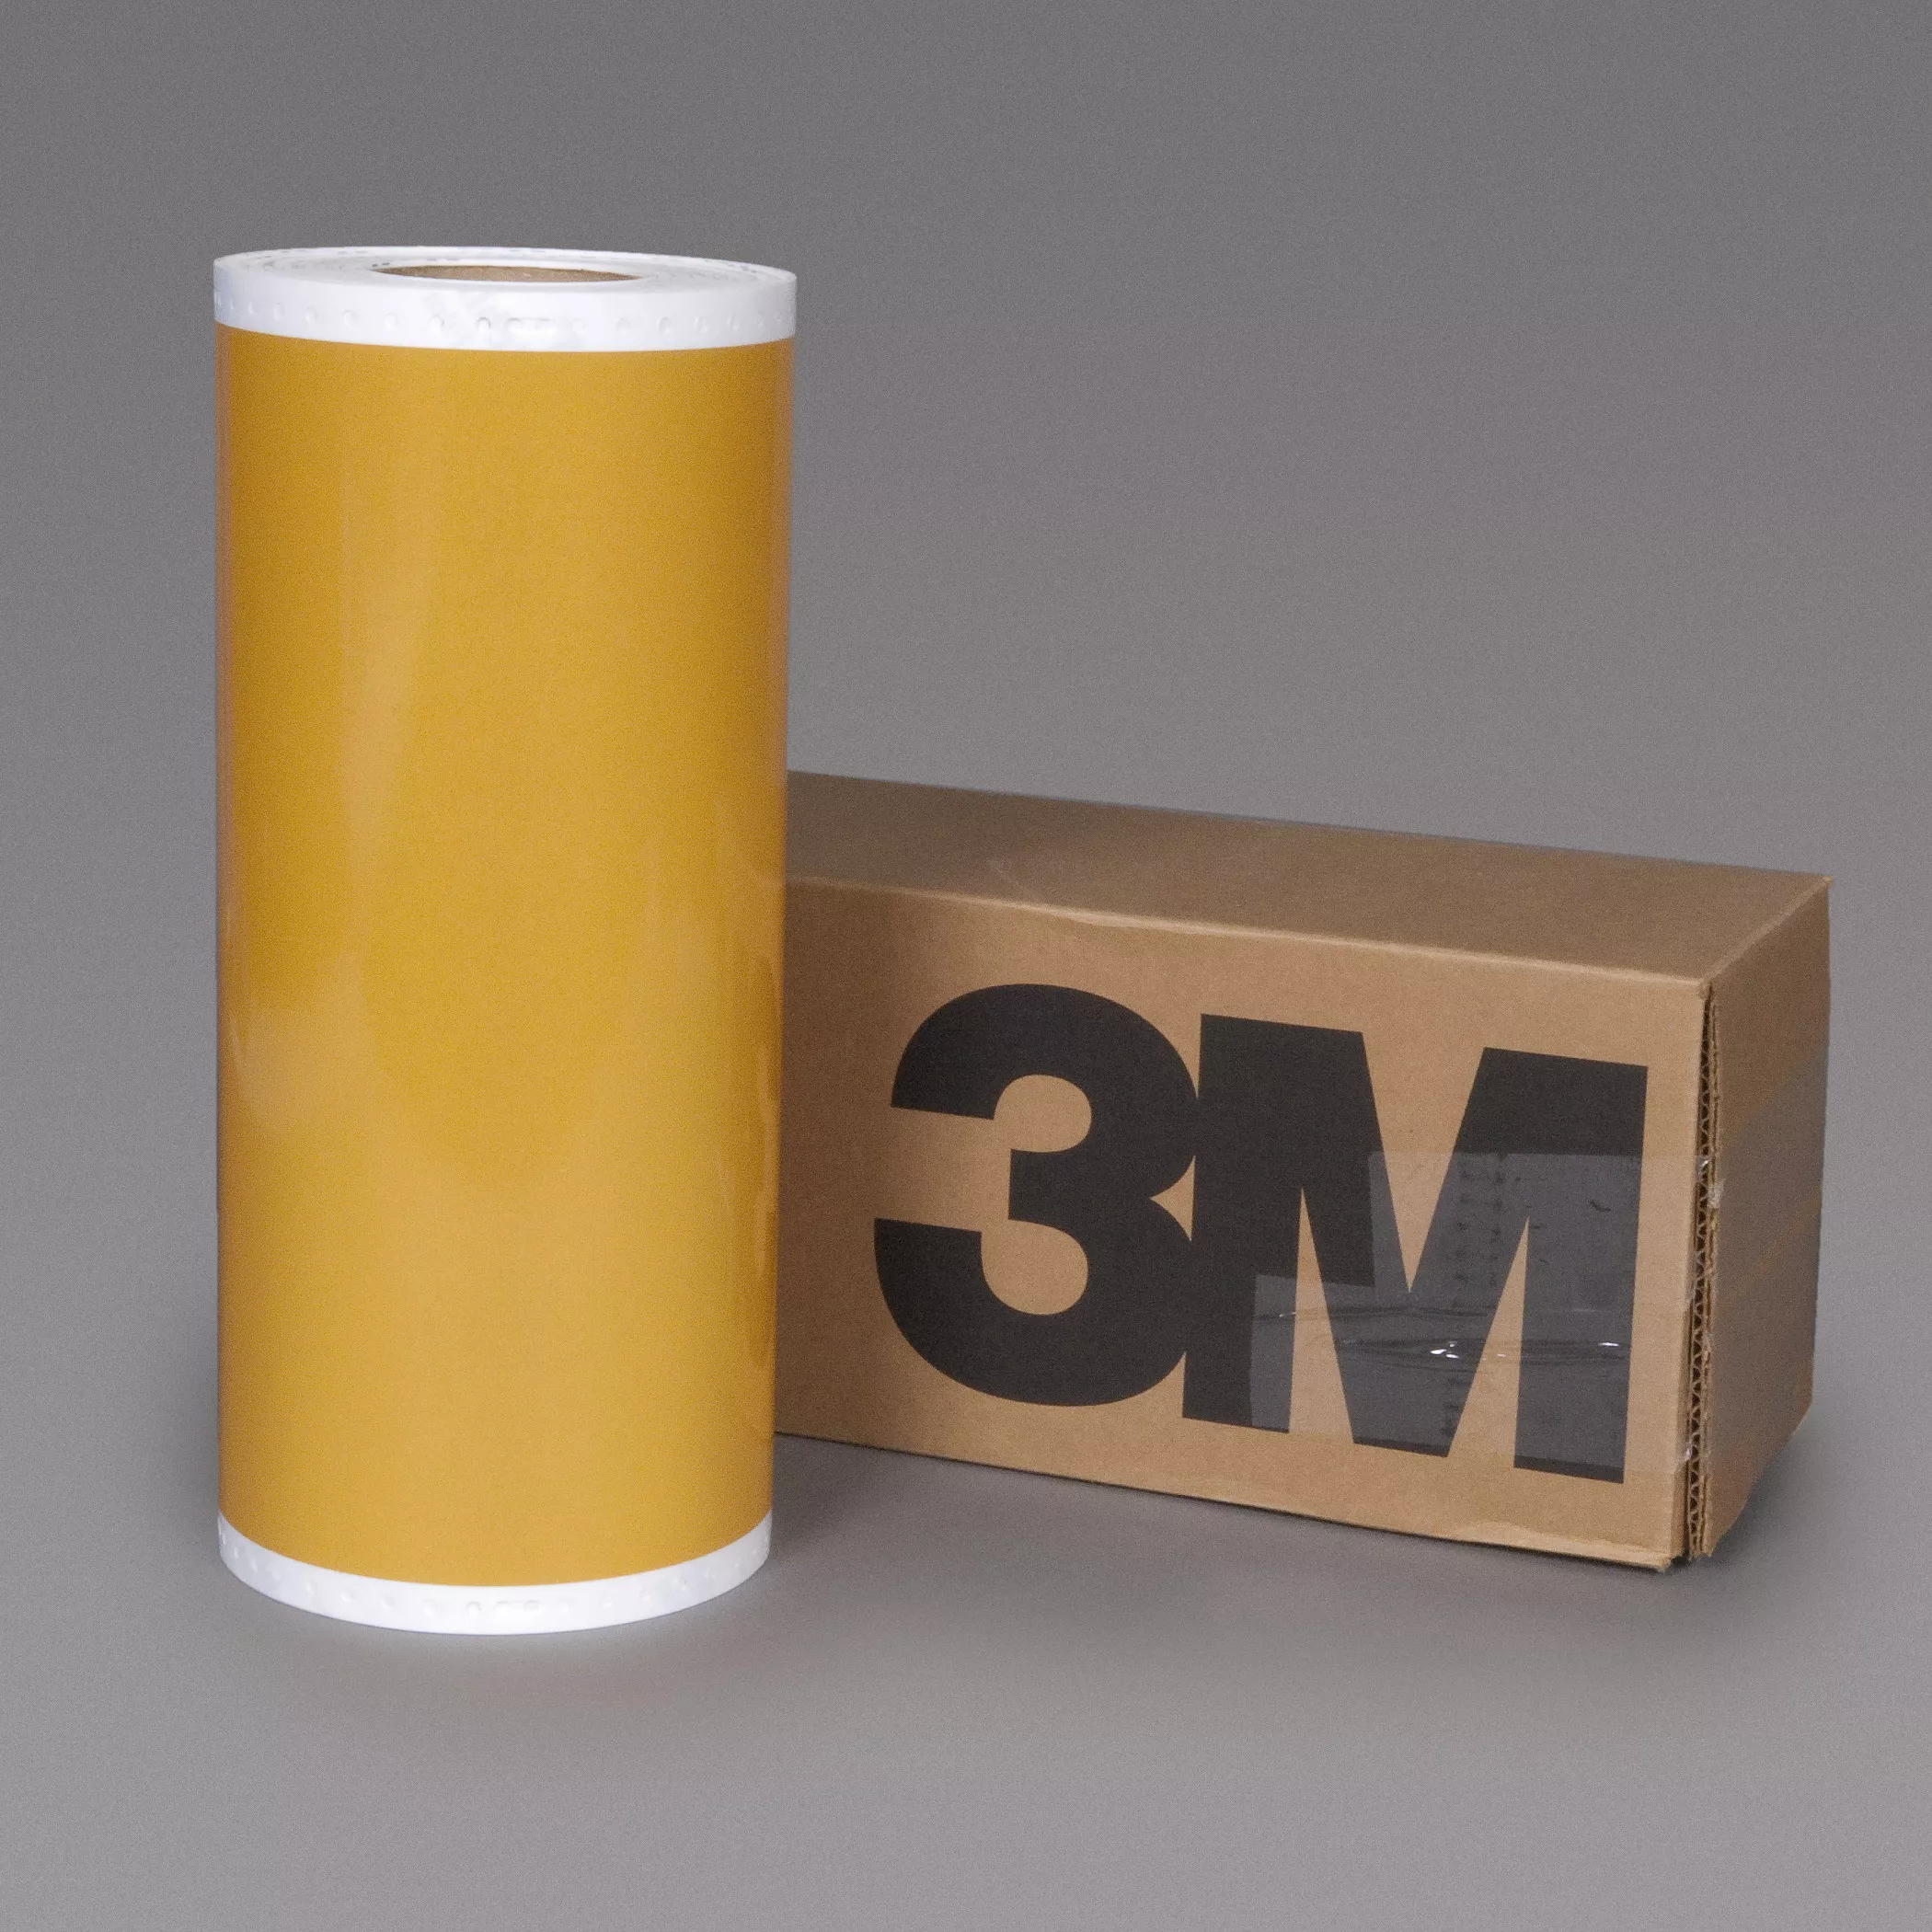 3M™ Scotchlite™ Reflective Graphic Film 680-0001, Custom Color, 48 in x 50 yd, 1 Roll/Case